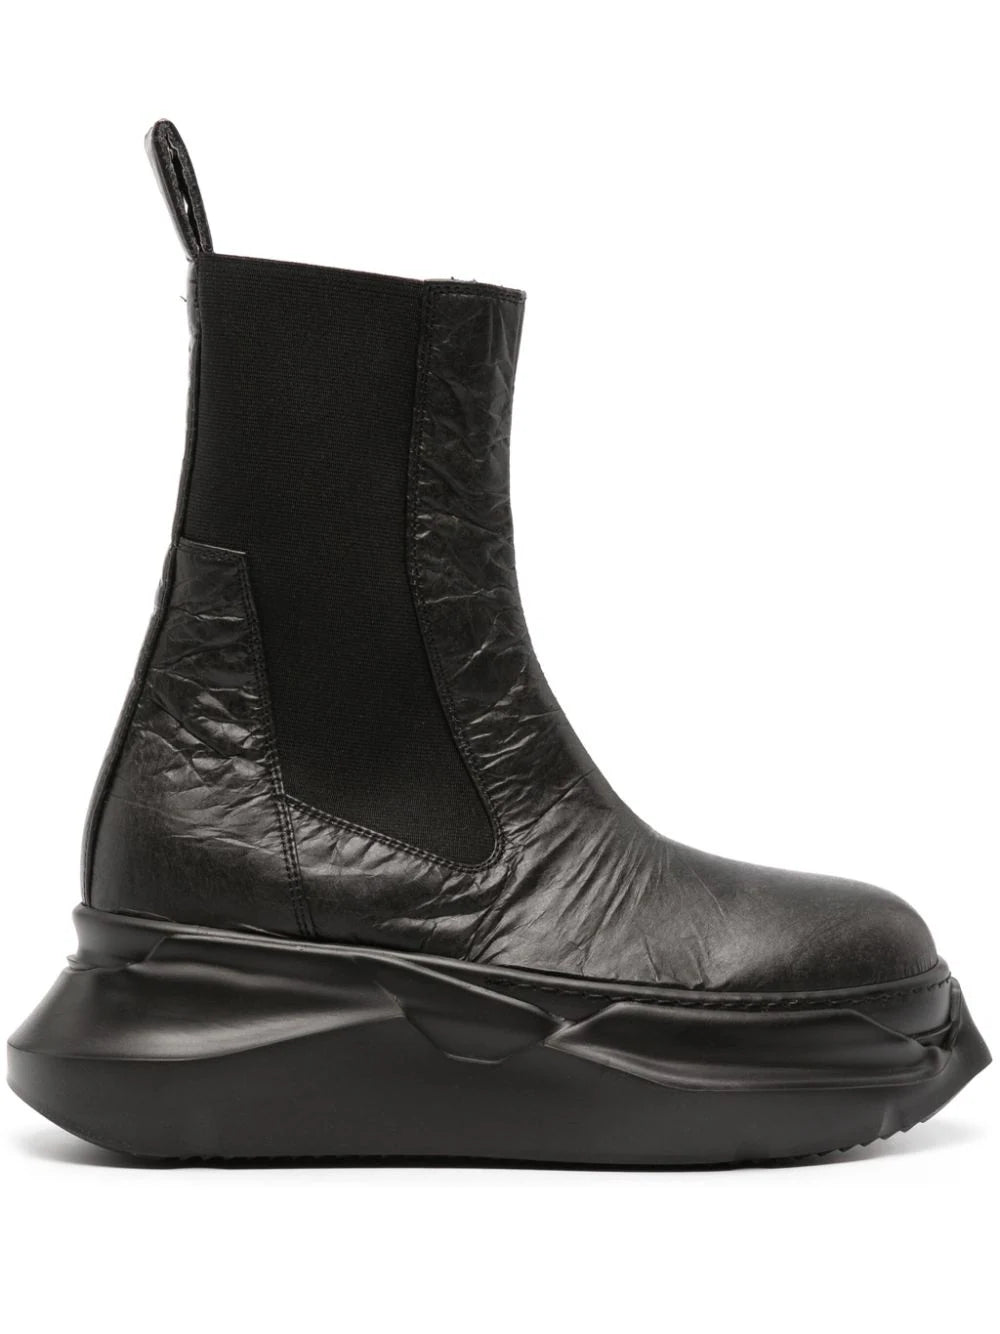 RICK OWENS DRKSHDW Women Beatle Abstract Boots – Atelier New York